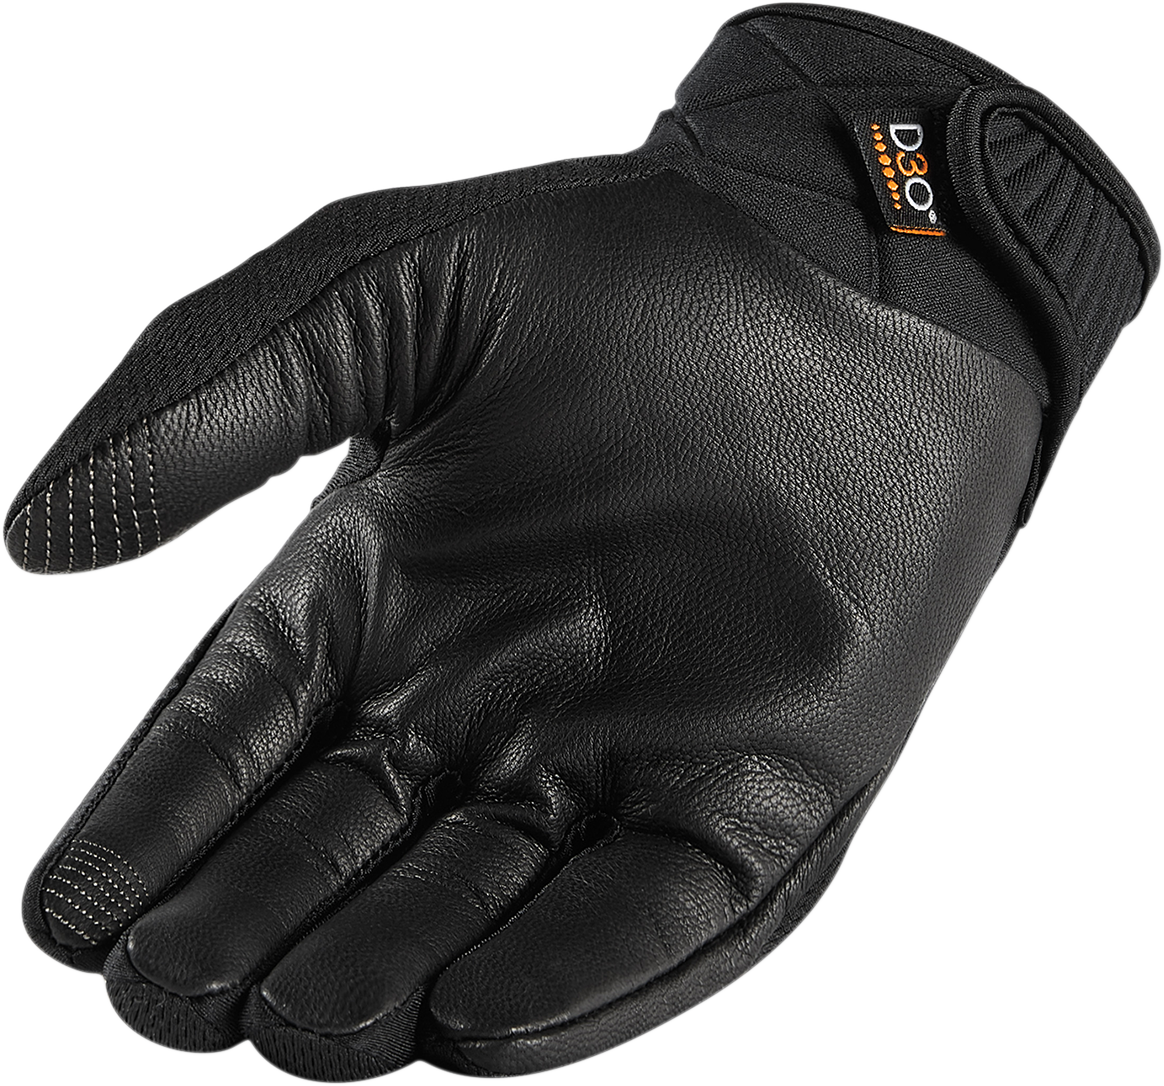 ICON Women's Anthem 2 Stealth CE™ Gloves - Large 3302-0732